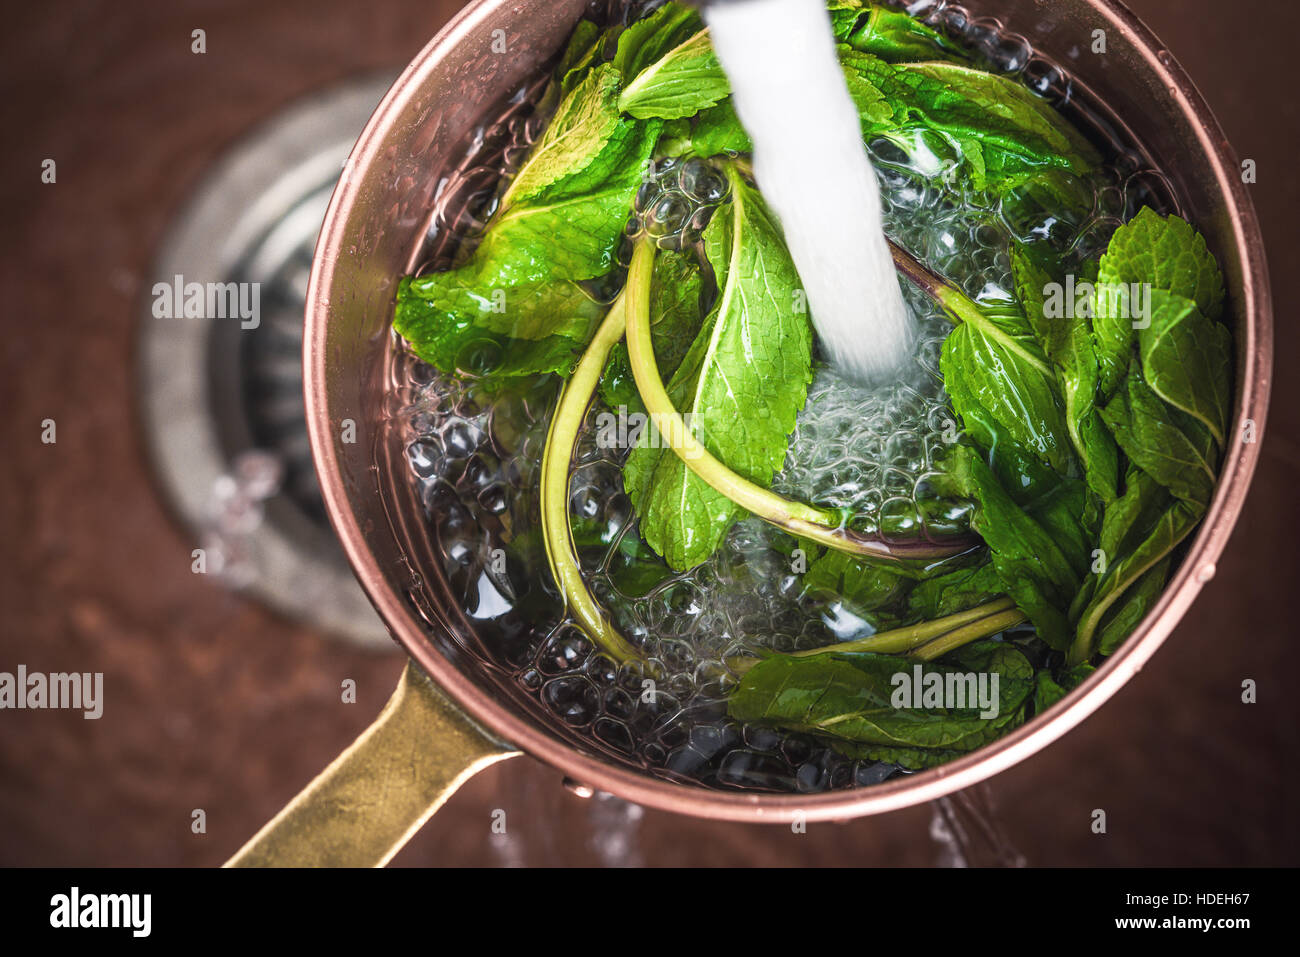 Washing the mint in the colander Stock Photo